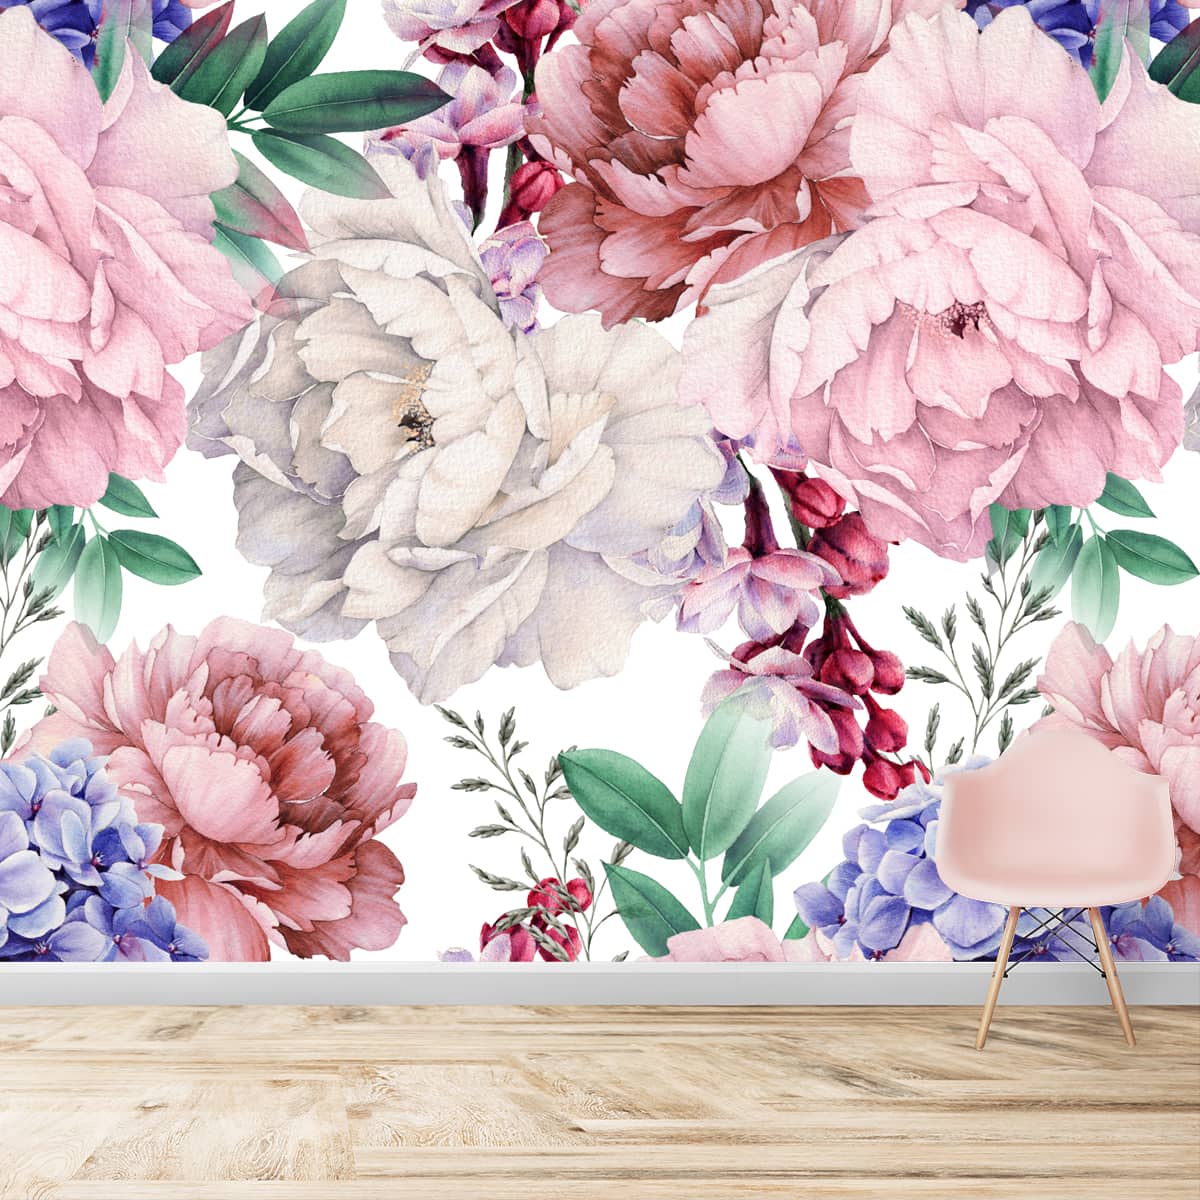 Water Color Painted Look Floral Wallpaper for Bedrooms, Big Floral Pattern